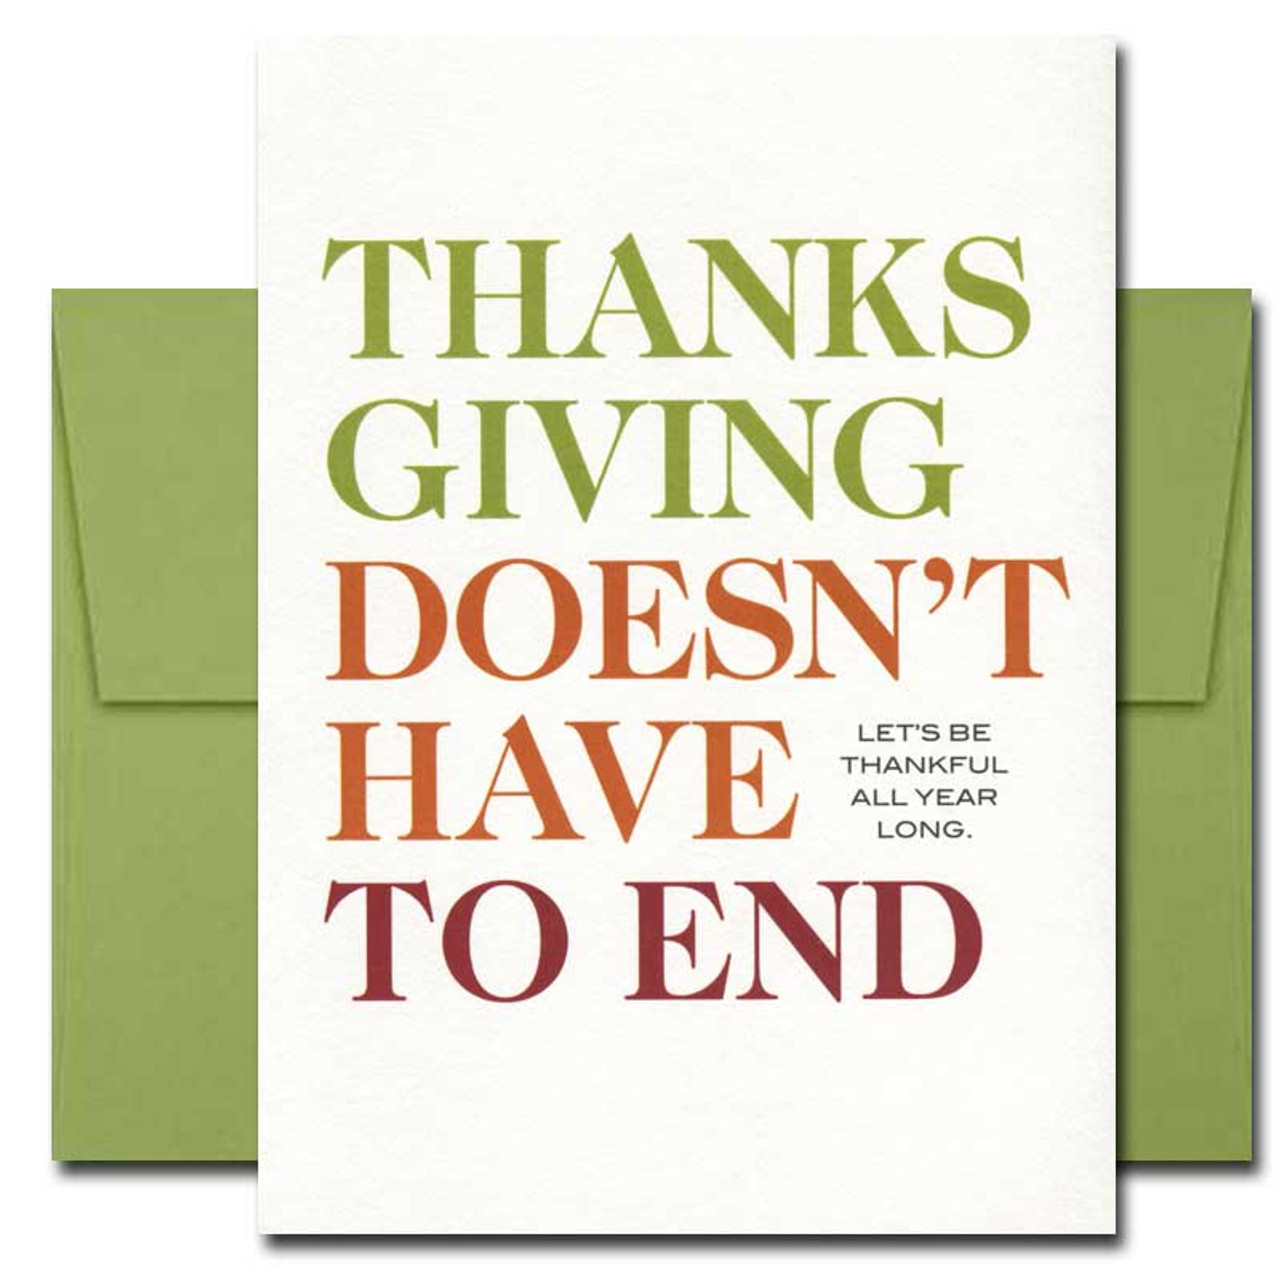 All Year Long Thanksgiving Card: Cover reads: Thanksgiving Doesn't Have to End  Let's Be Thankful All Year Long